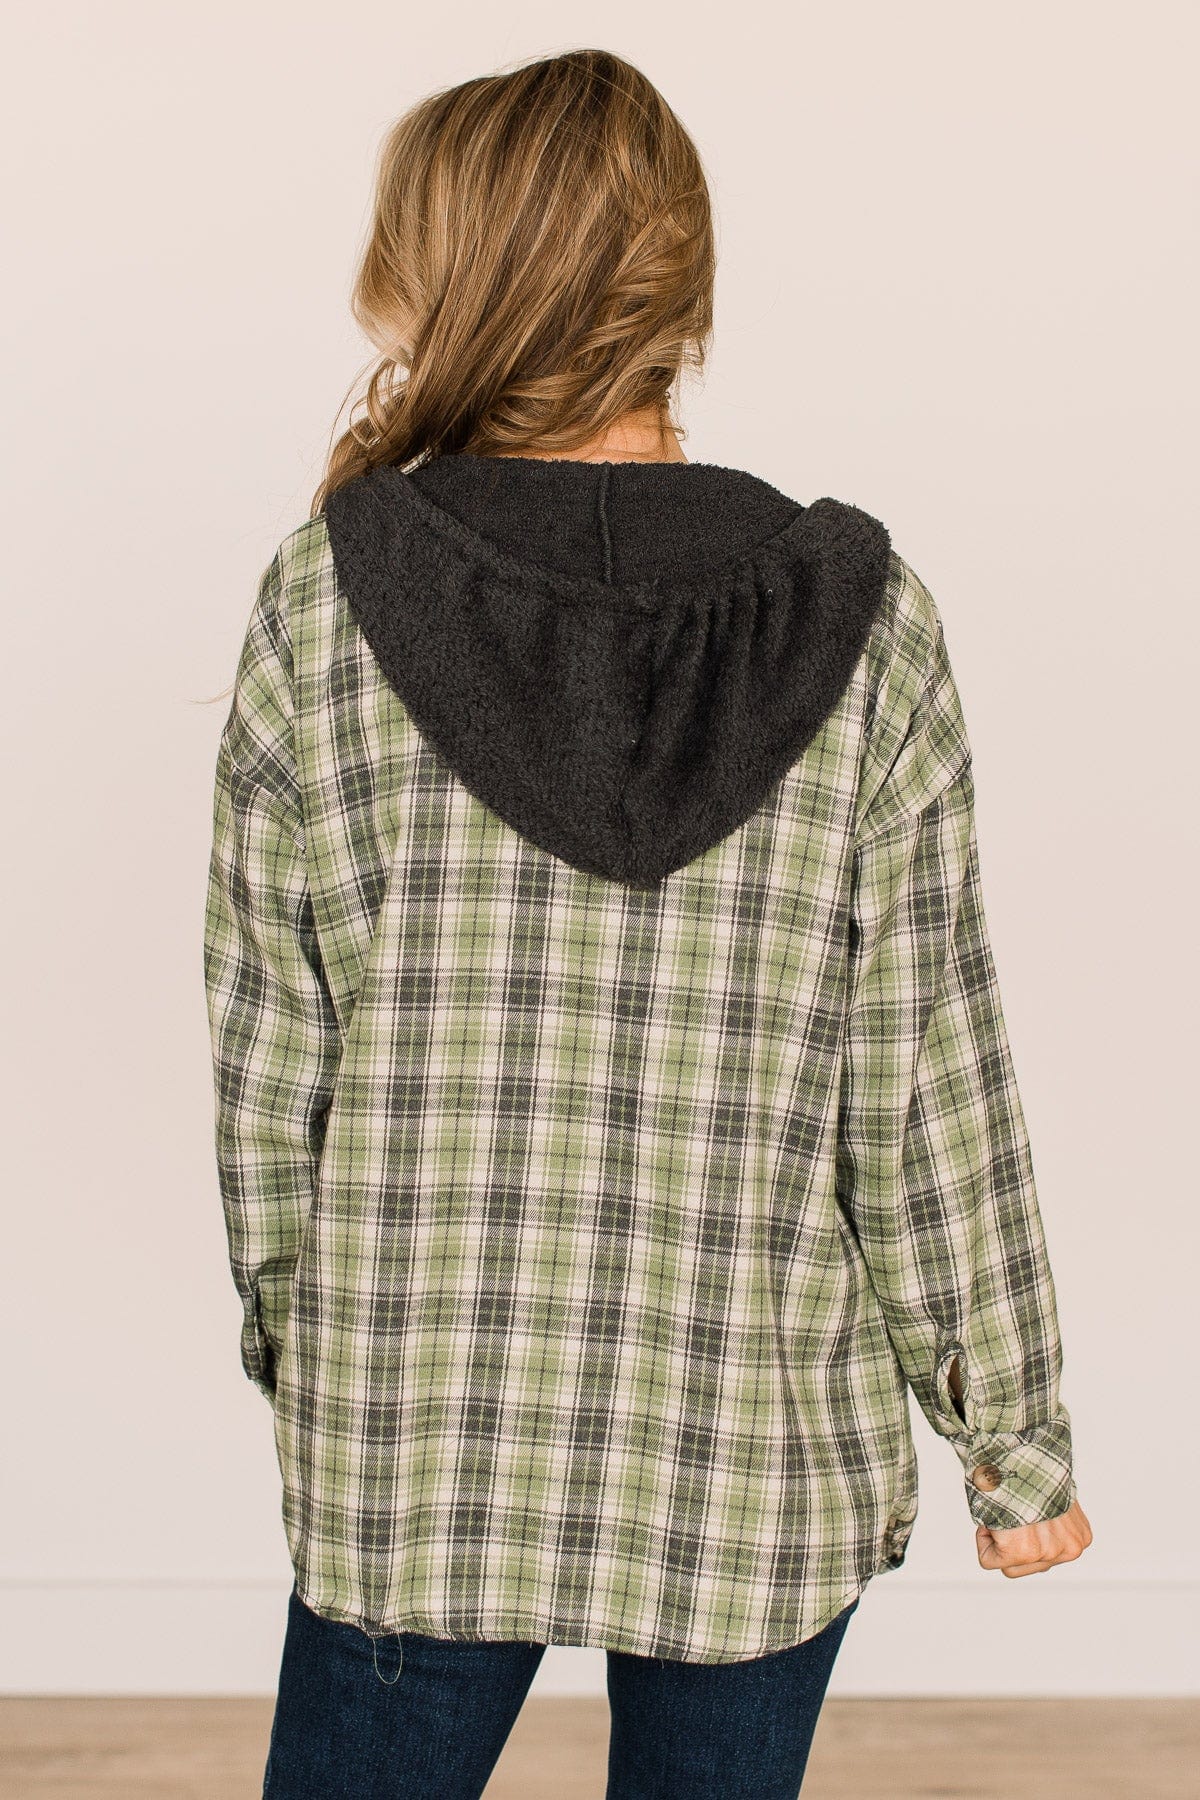 Take The Leap Hooded Plaid Top- Green & Charcoal